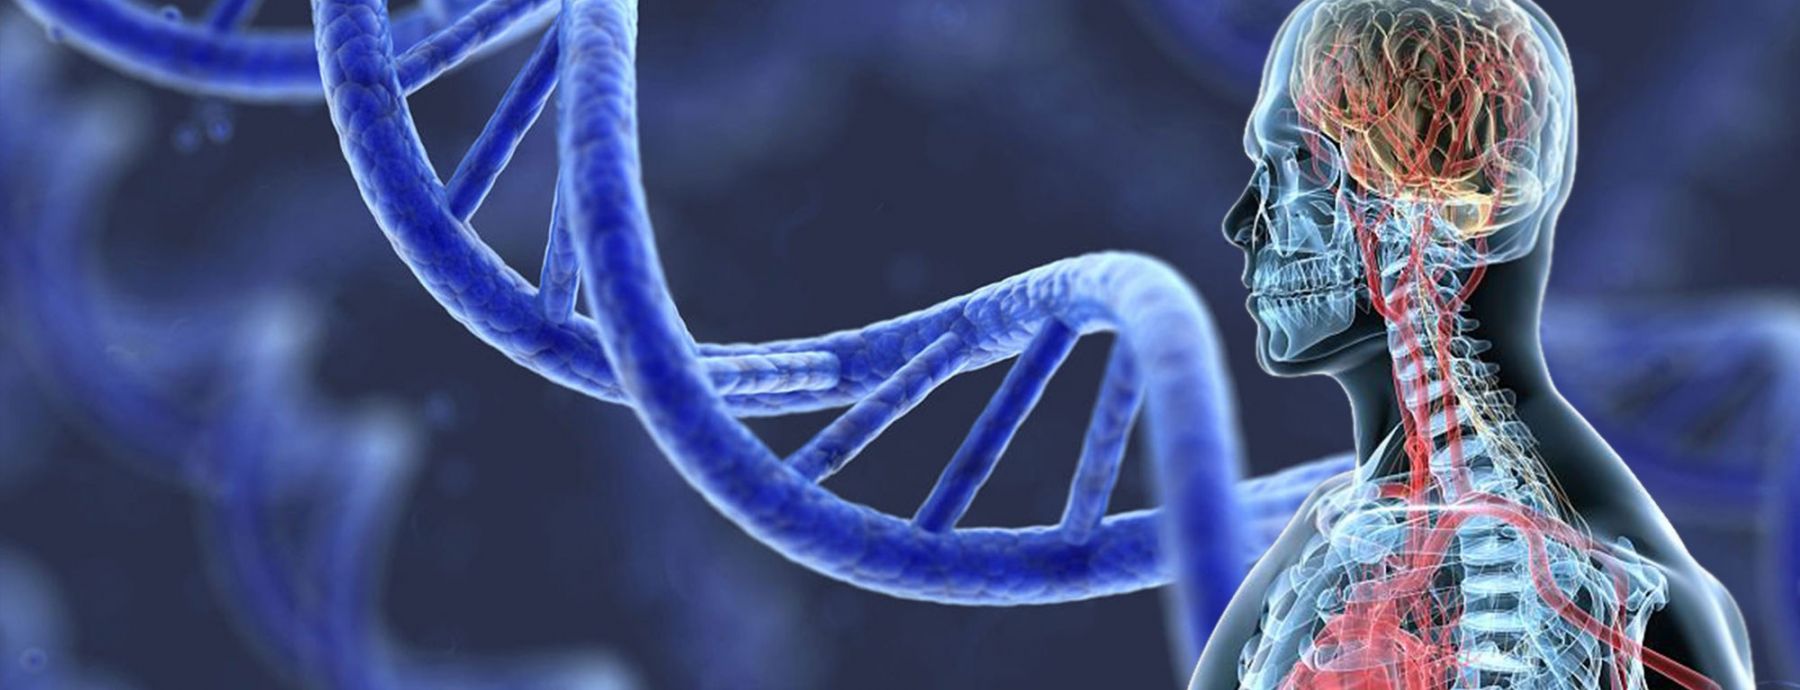 Artist's rendering of human body and large-scale DNA molecule.